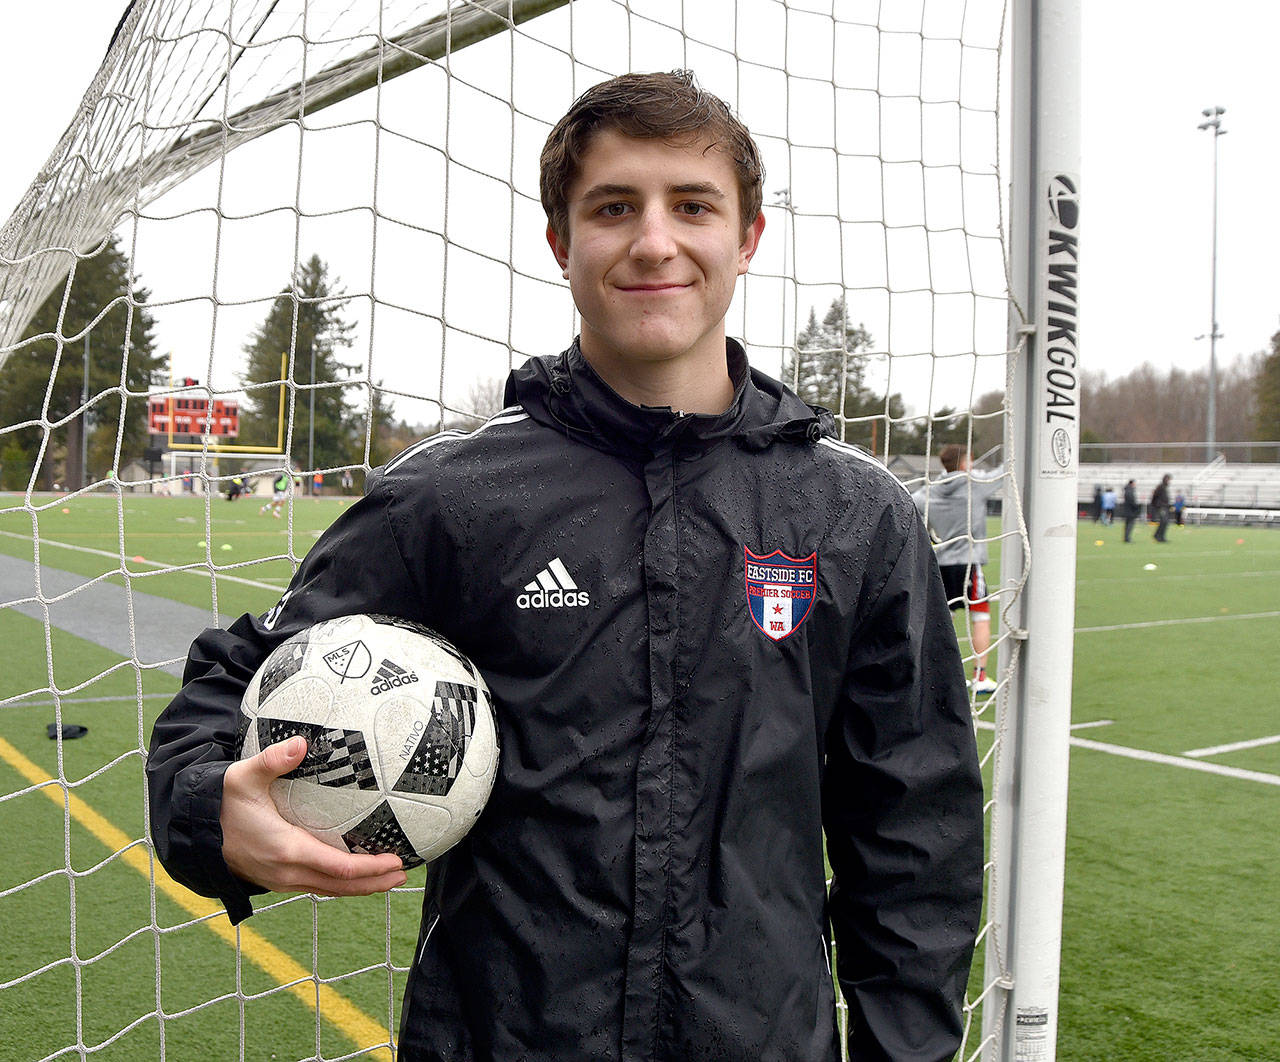 Carol Ladwig/Staff Photo                                Reed Paradissis, sophomore co-captain of the Mount Si High School soccer team, is confident that his team’s hard work will pay off this season.